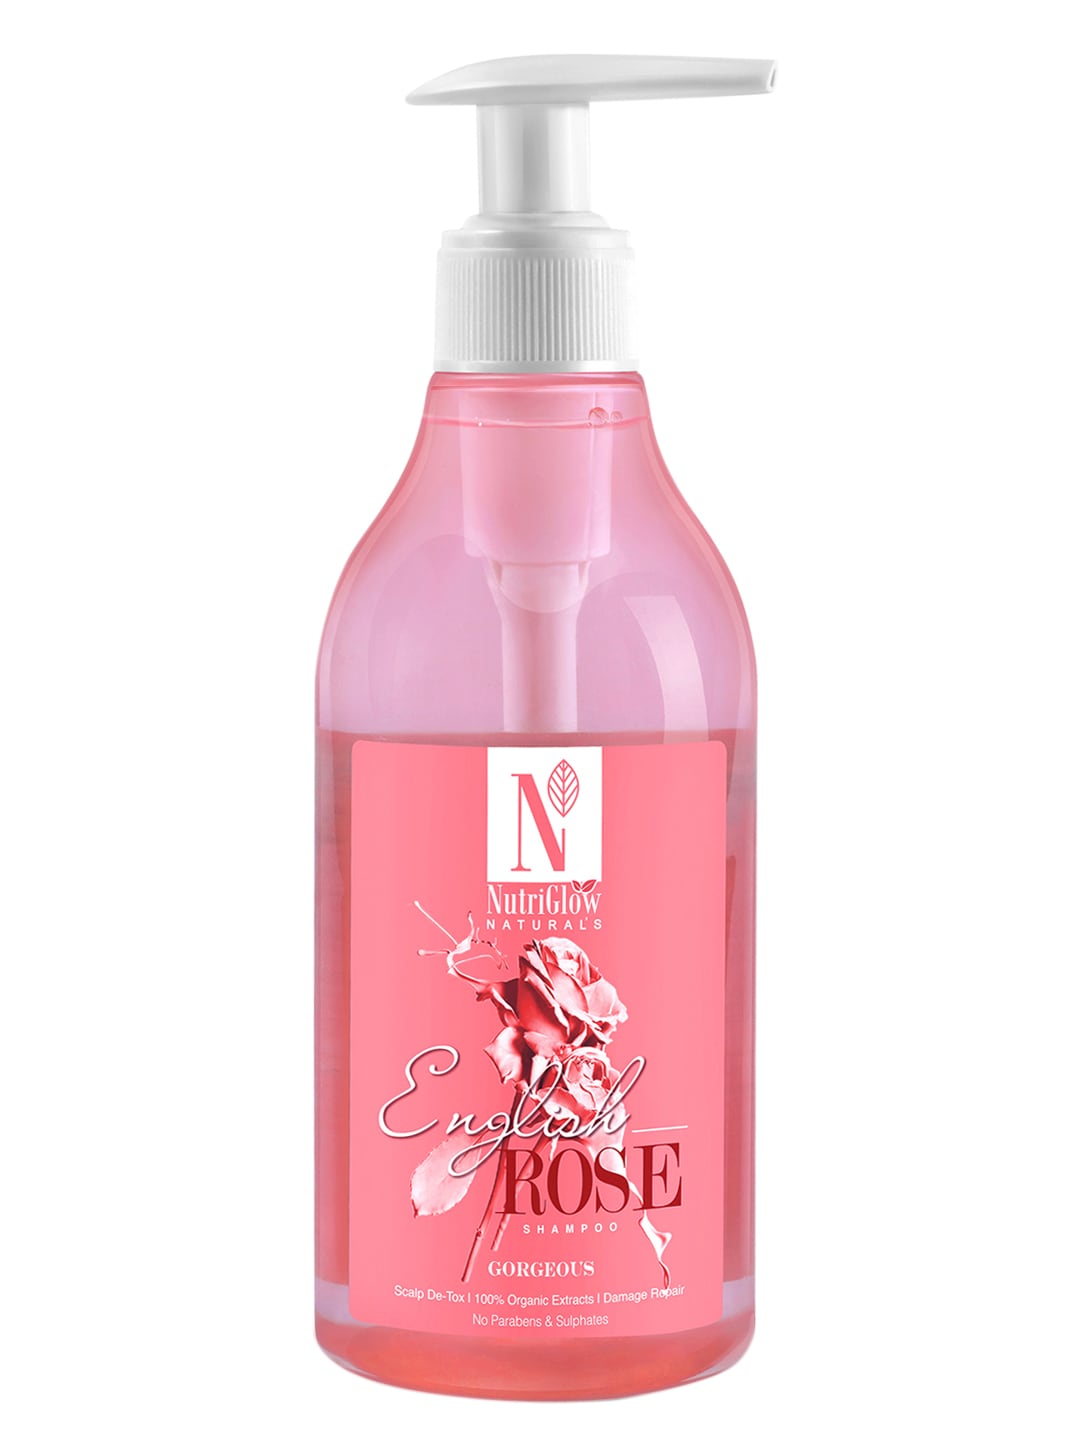 NutriGlow Unisex Naturals English Rose Shampoo with 100% Organic Extracts 300 ml Price in India